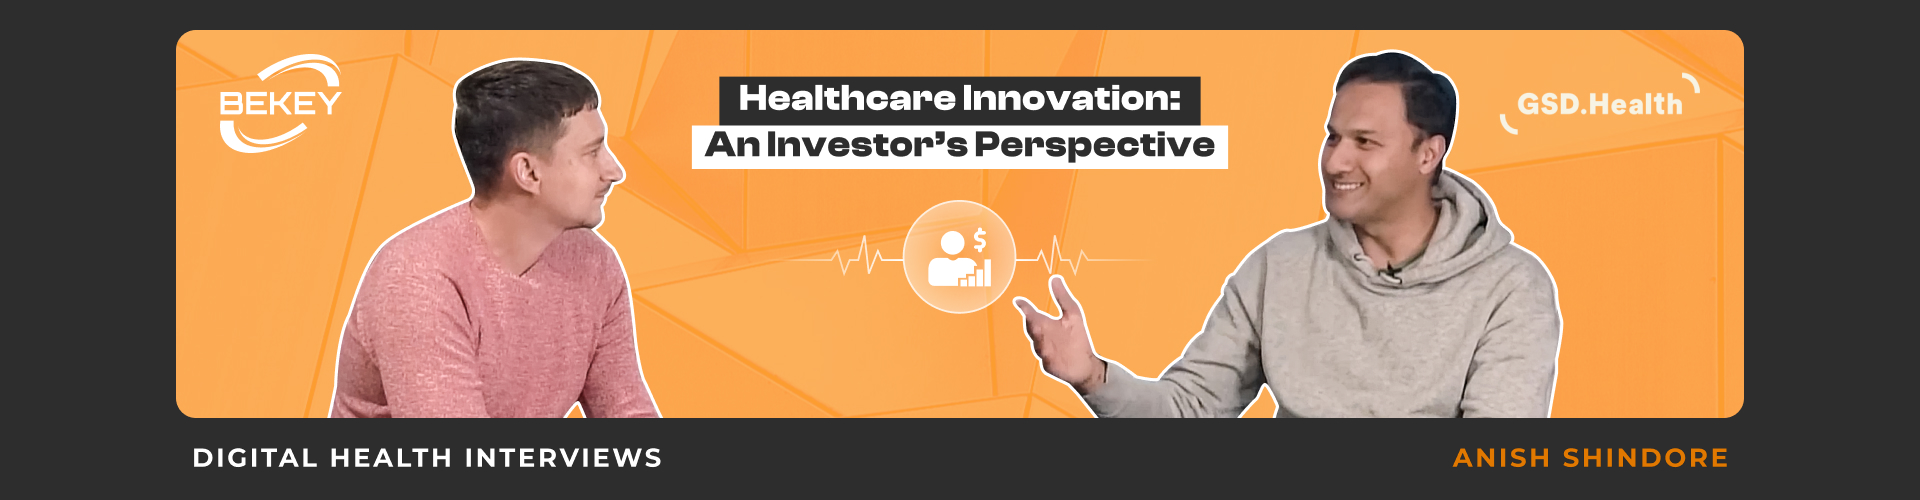 Healthcare Innovation: an Investor’s Perspective. Digital Health Interviews: Anish Shindore - image